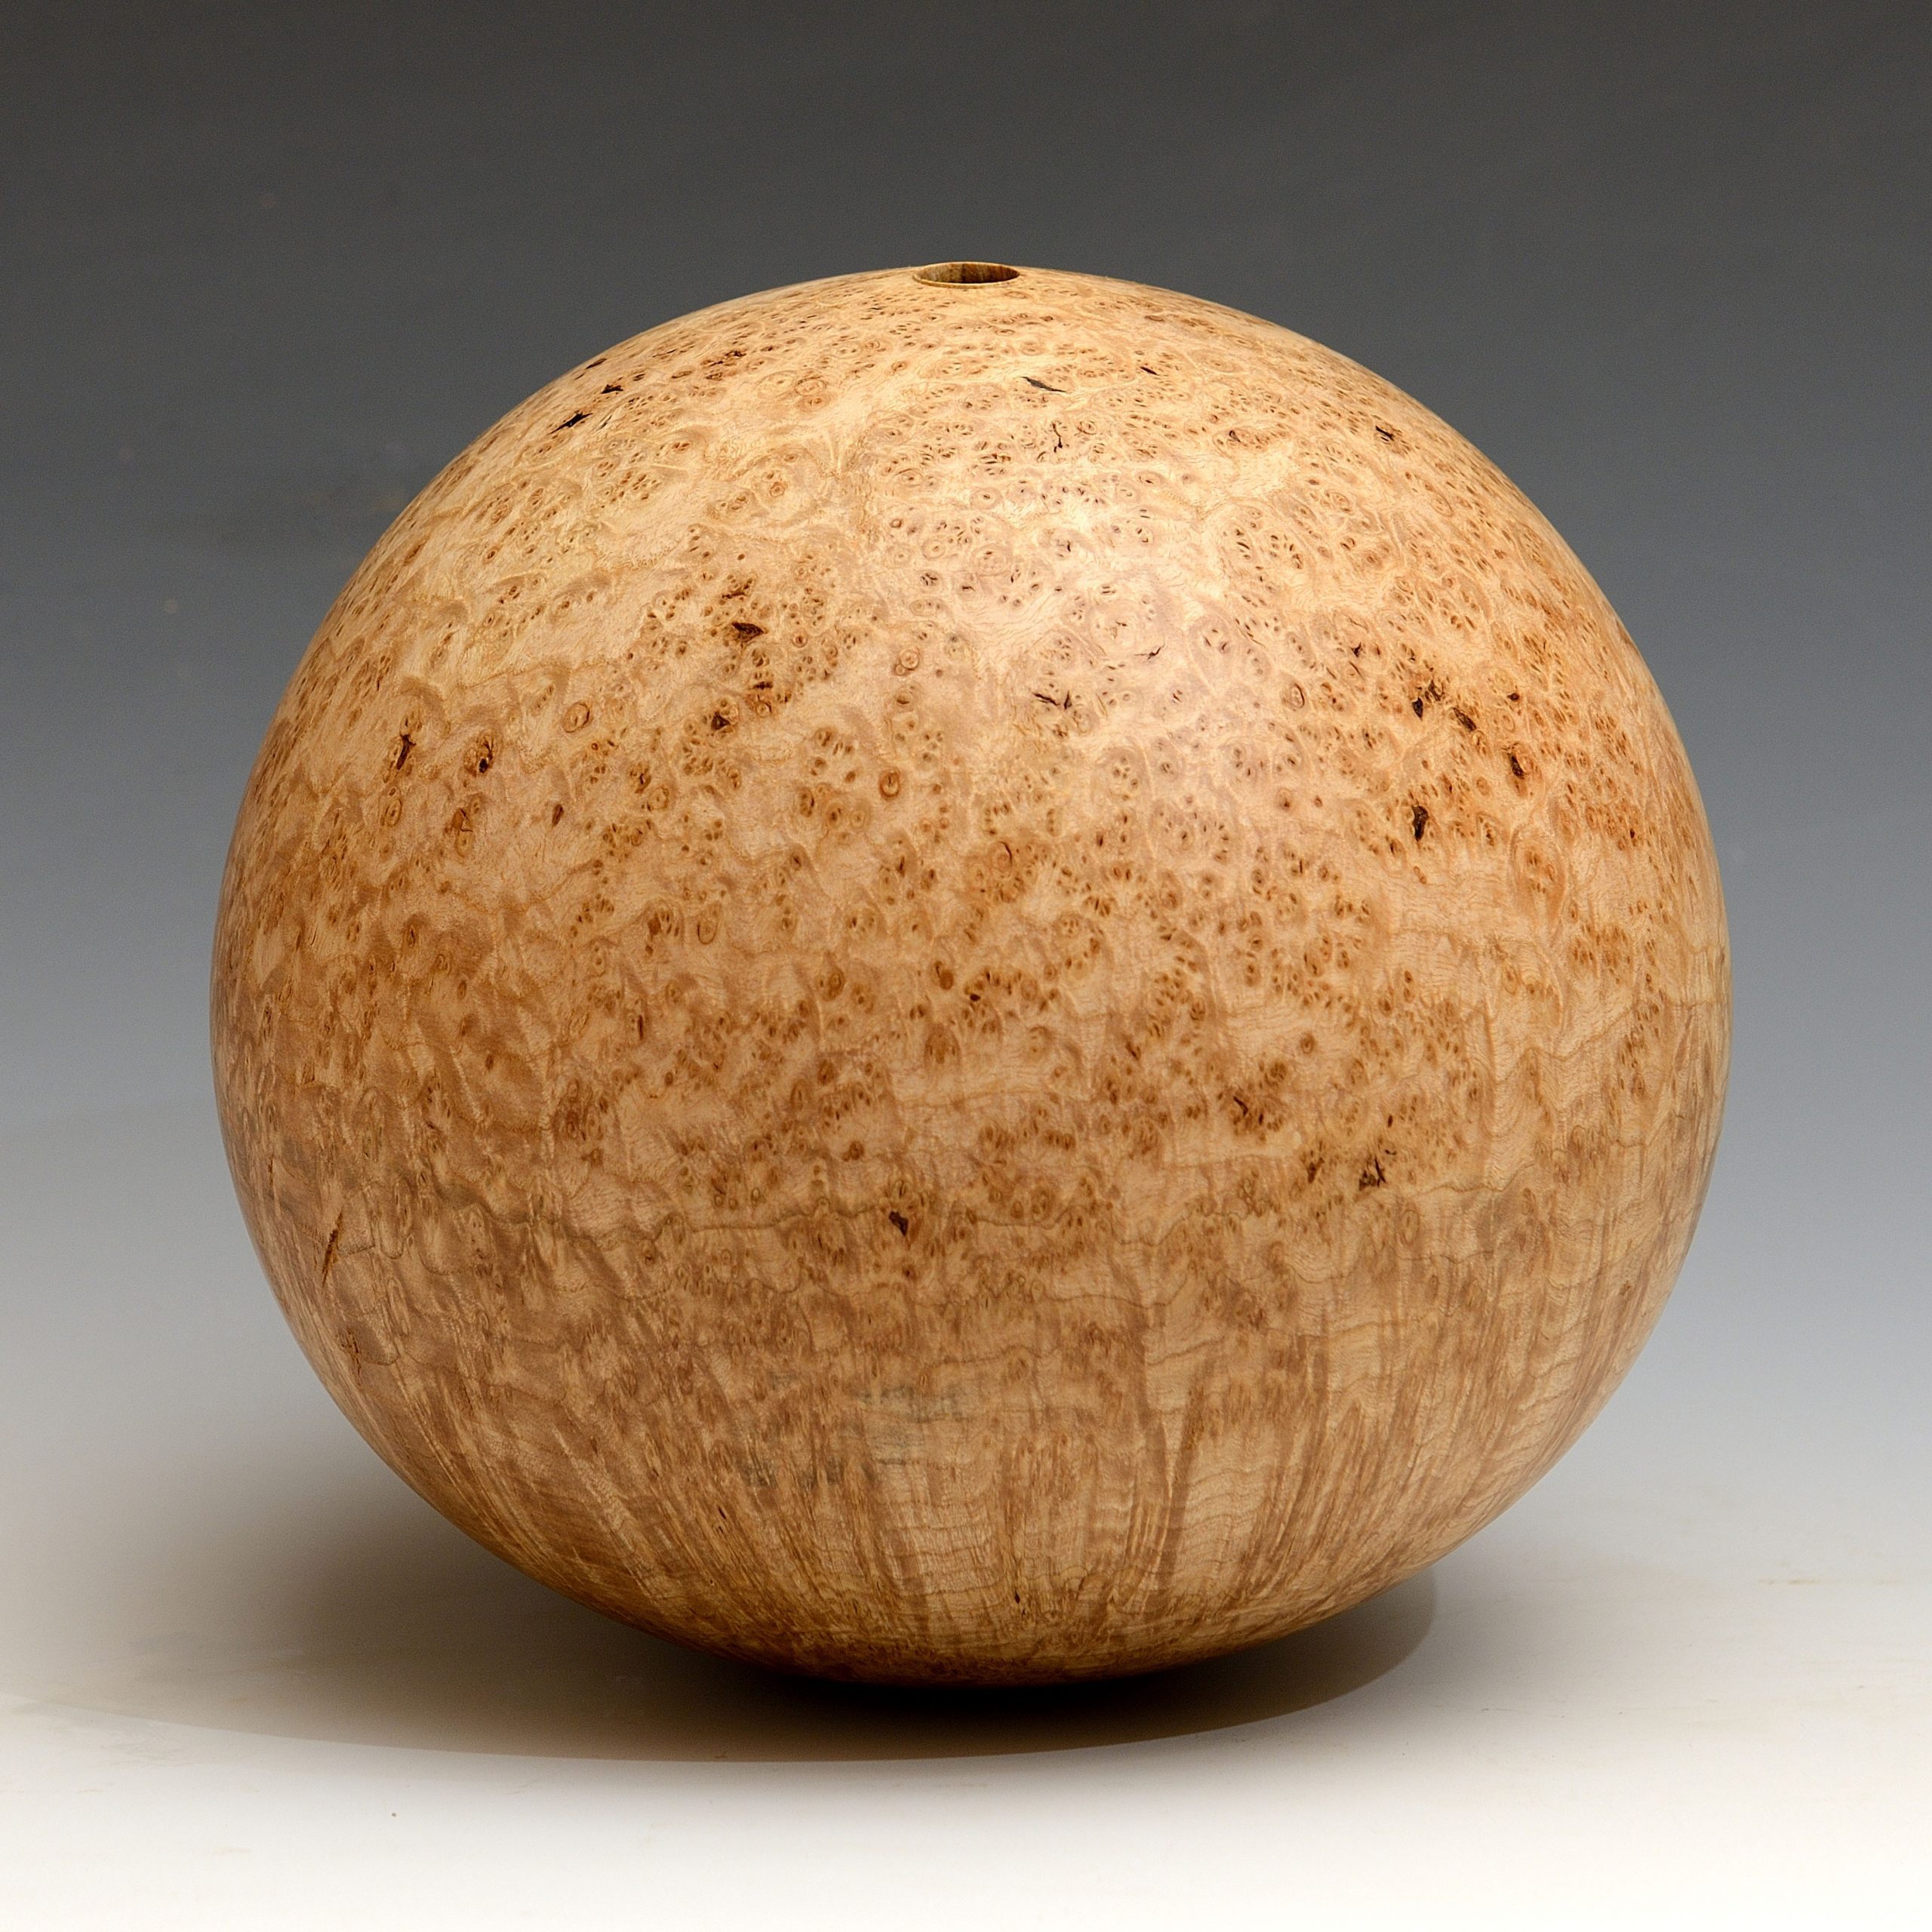 Gordon Browning, Morning Star, 2010, Black Ash Burl, 7x8x8 inches, collection of the artist